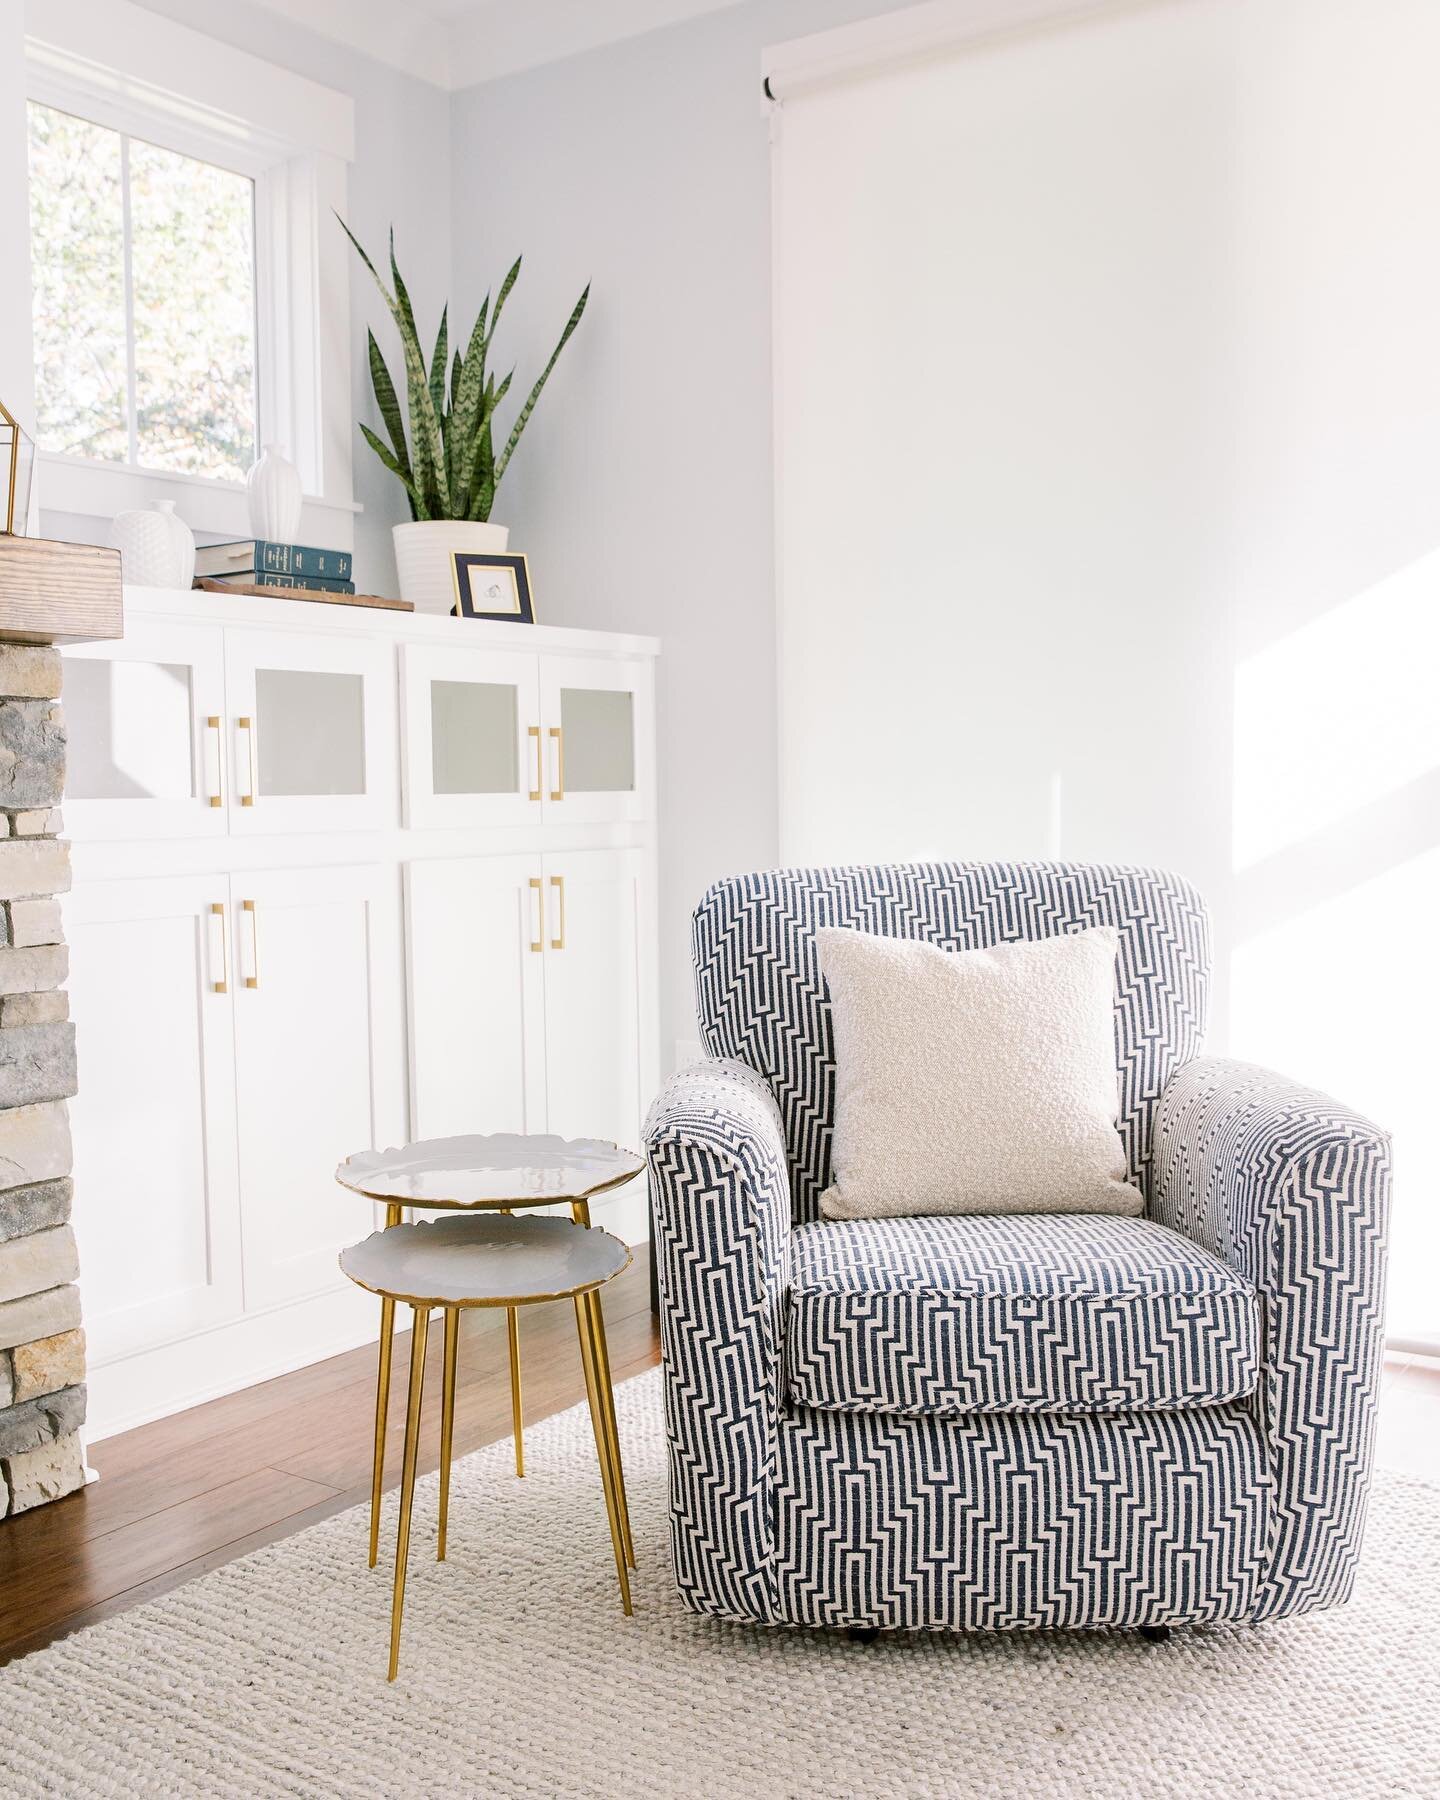 Sittin&rsquo; pretty ✨💁🏼&zwj;♀️

This was my clients&rsquo; existing chair that just needed a makeover to go with the new room design. Swipe for the before! 

📸 @emilymarchpayne 

#kelseyleeinteriors #interiordesign #reupholstery #raleighdesign #b